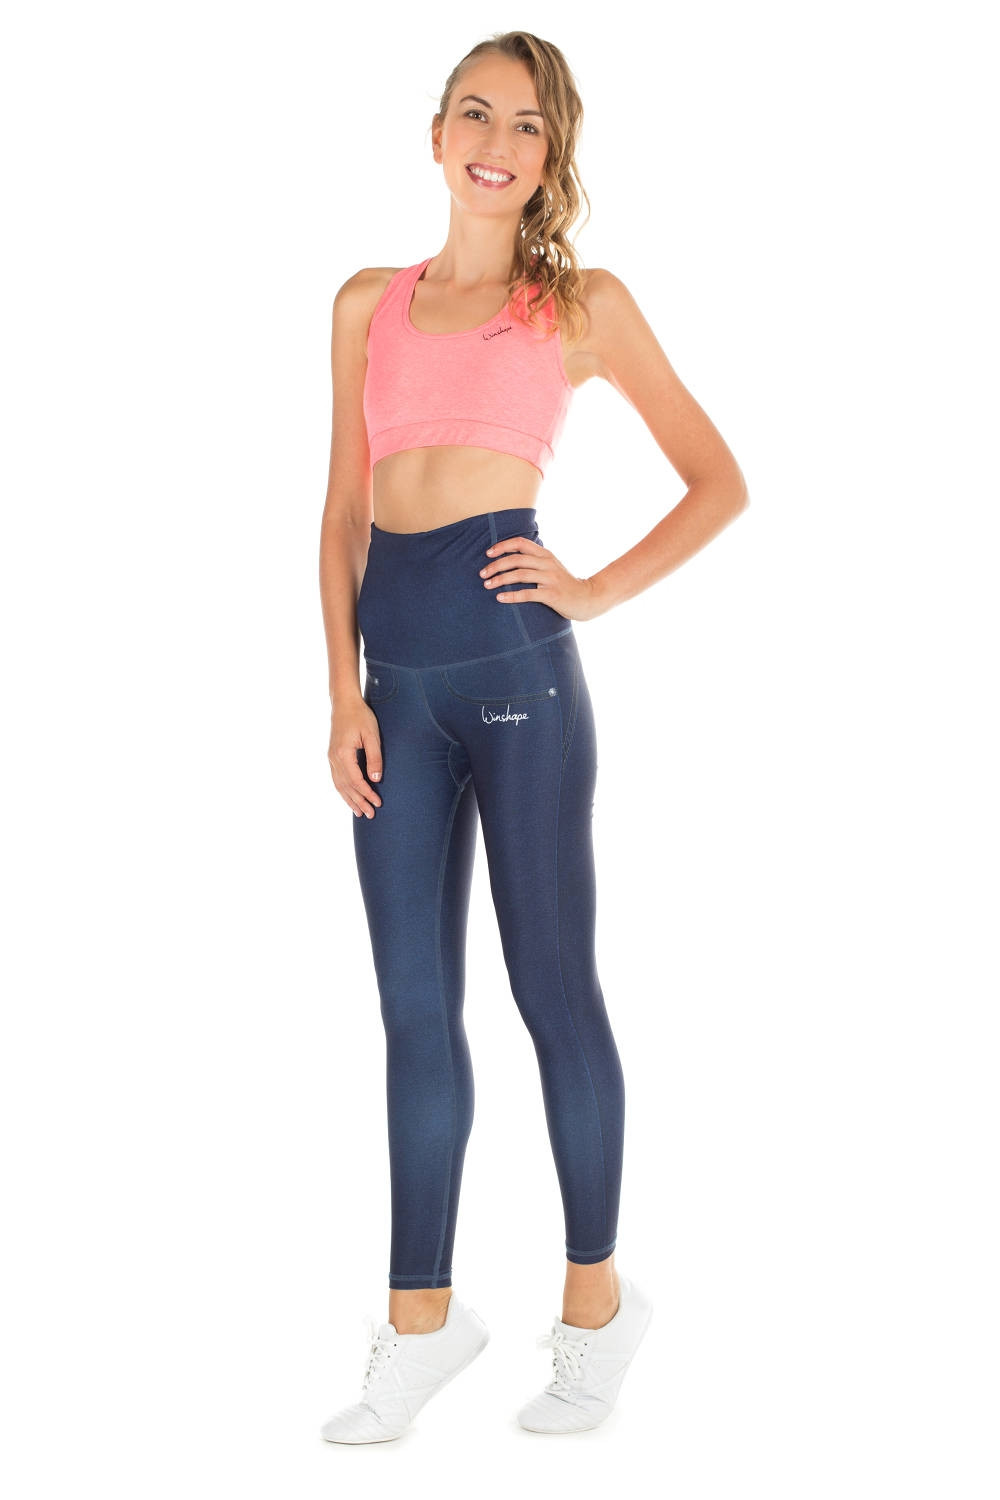 Tights HWL102, rich Winshape Power Style blue, Jeans High Slim Functional Shape Waist “Bootylicious”